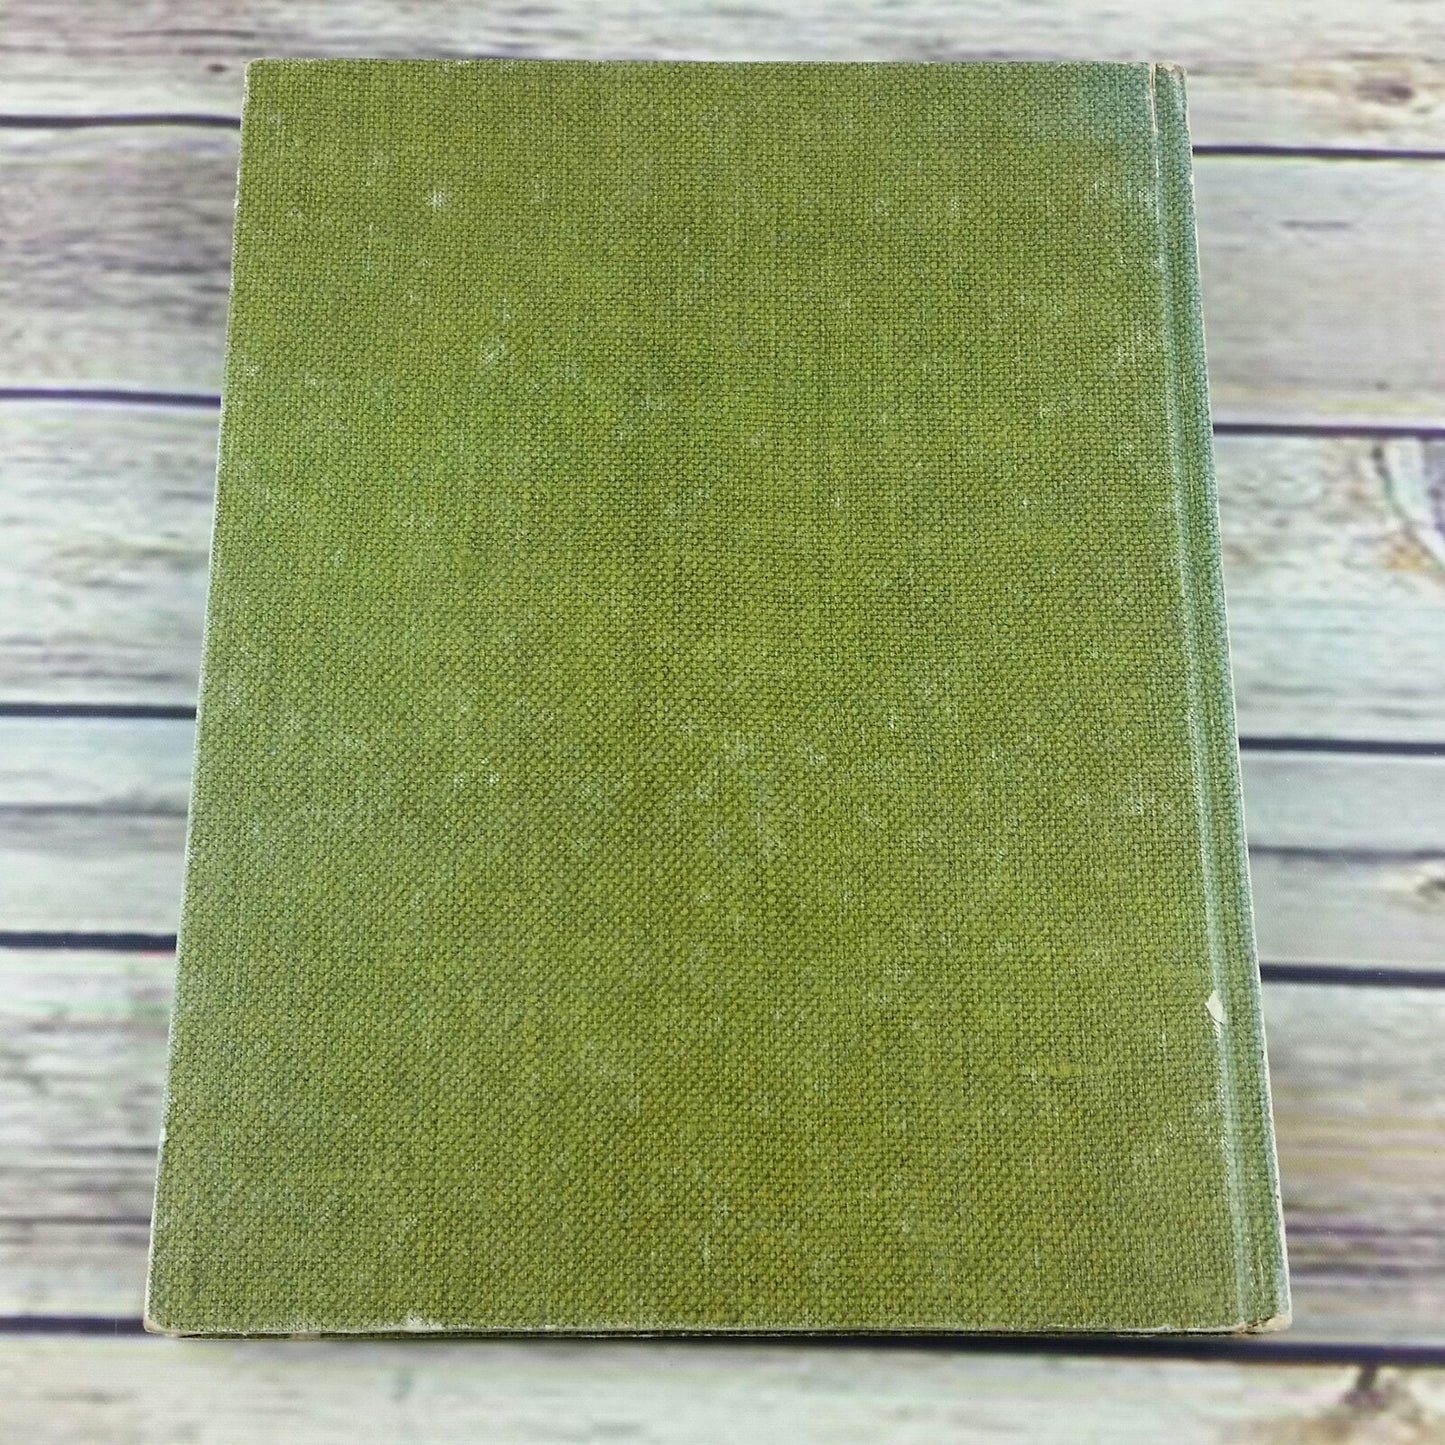 Vintage Cookbook Cooking Bold and Fearless Sunset Cook Book for Men 1967 Hardcover - At Grandma's Table